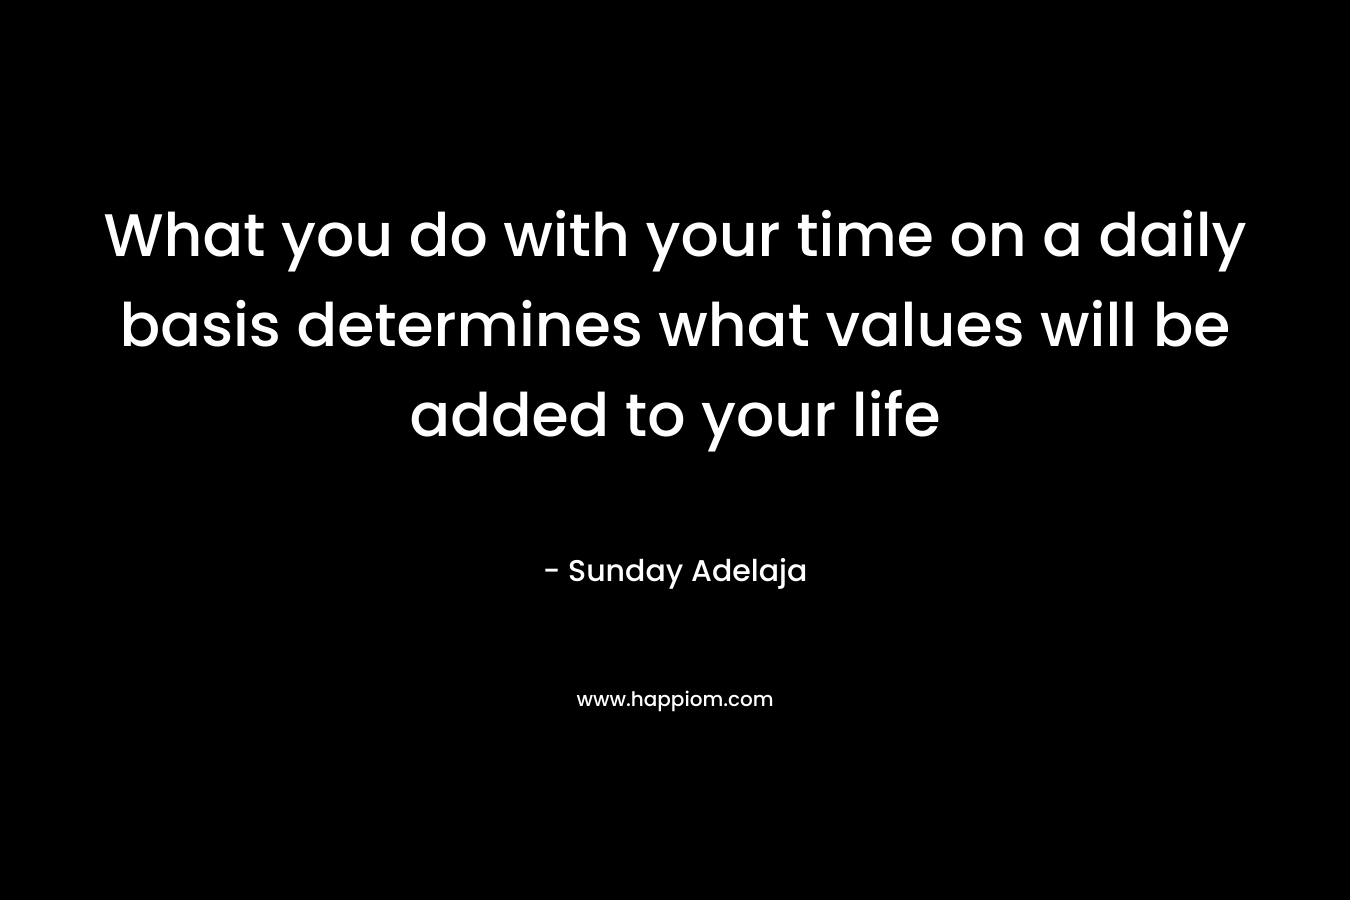 What you do with your time on a daily basis determines what values will be added to your life